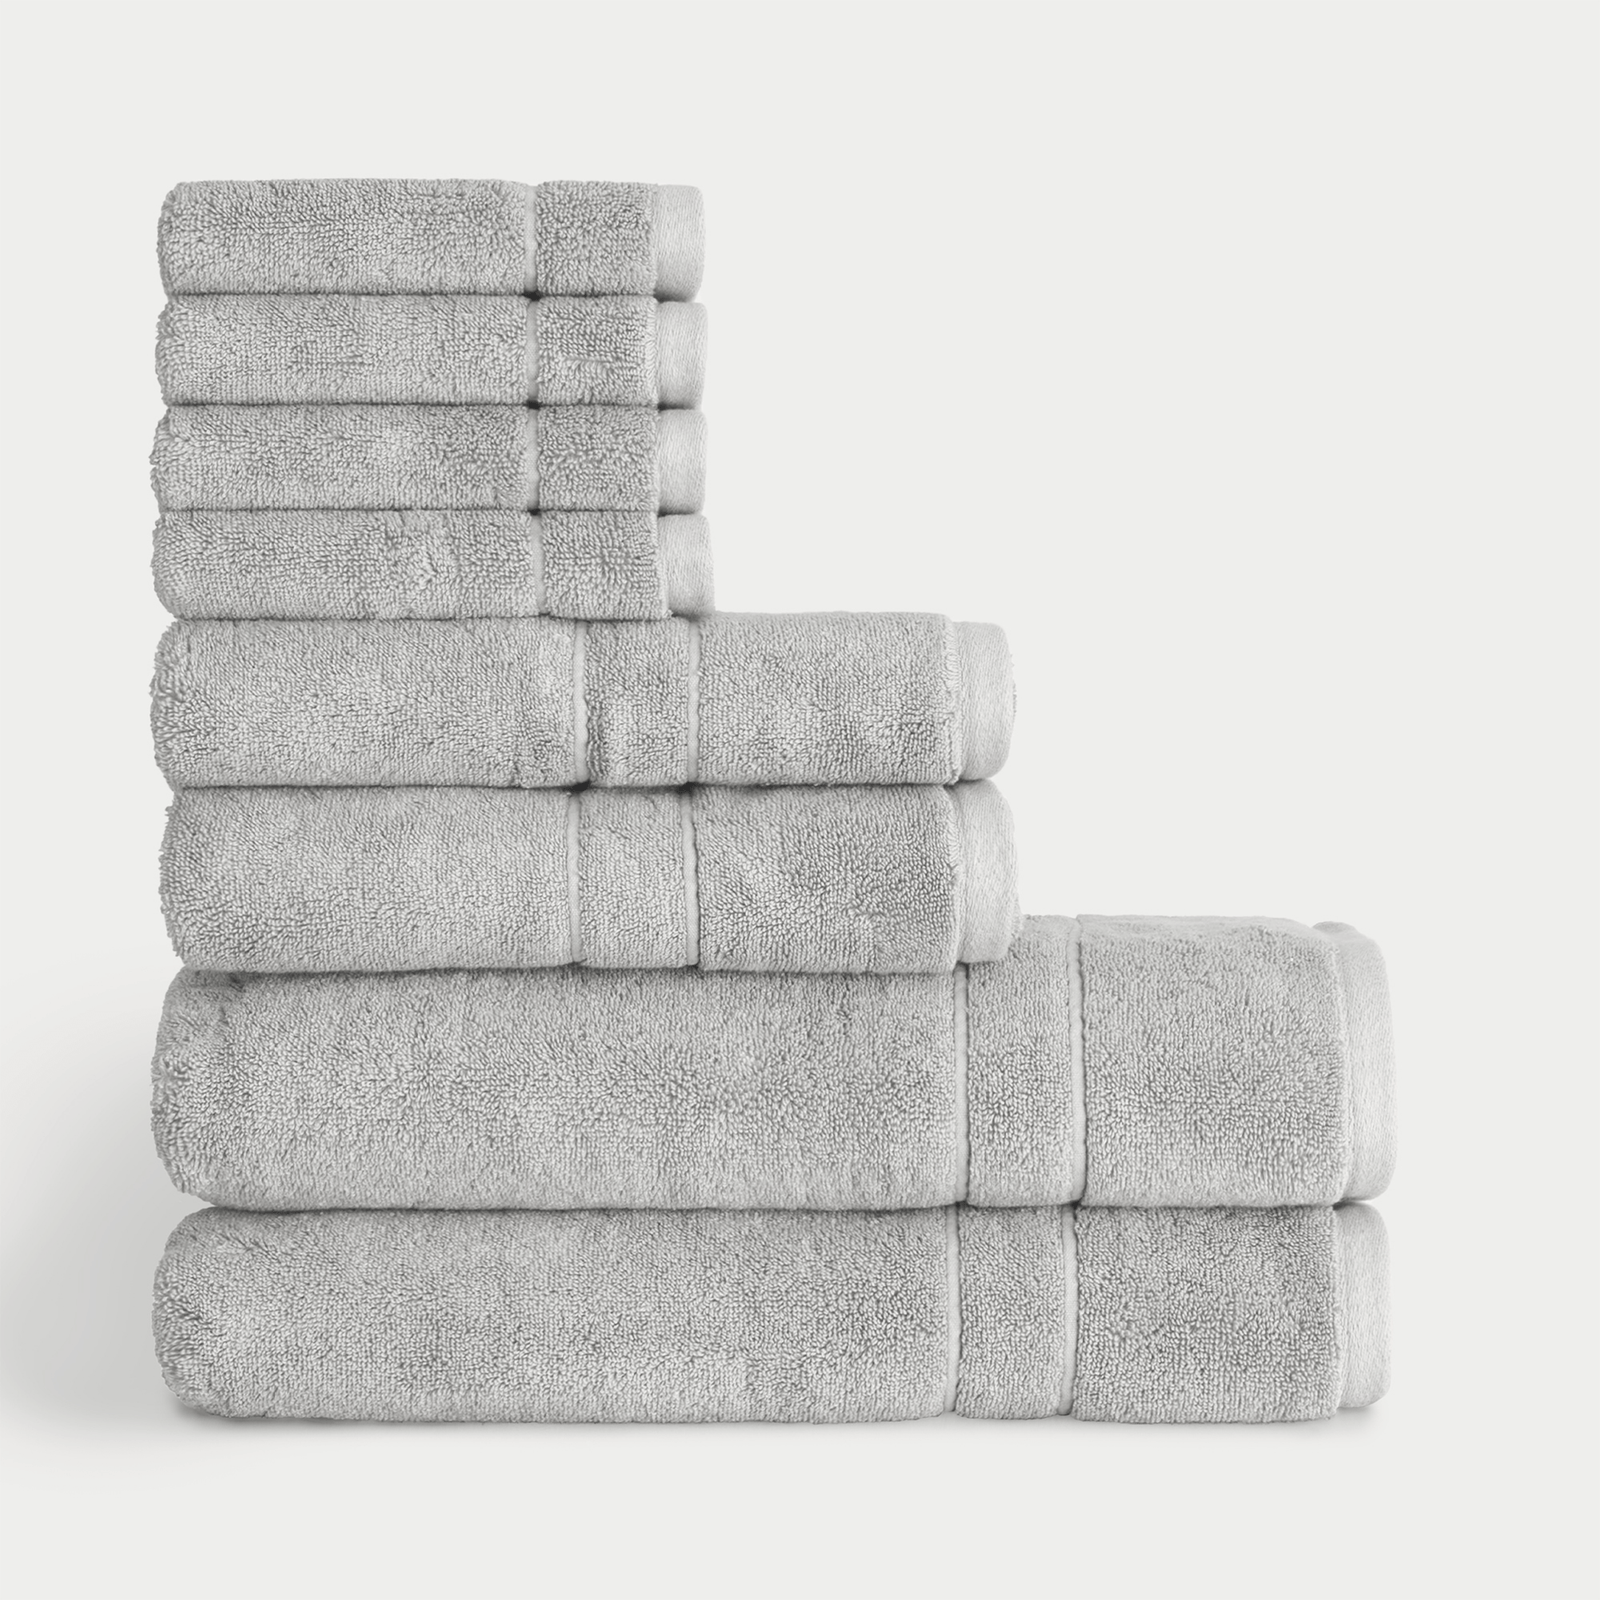 Premium Plush Bath Towel Set in the color Light Grey. Photo of Premium Plush Bath Towel Set taken with white background 